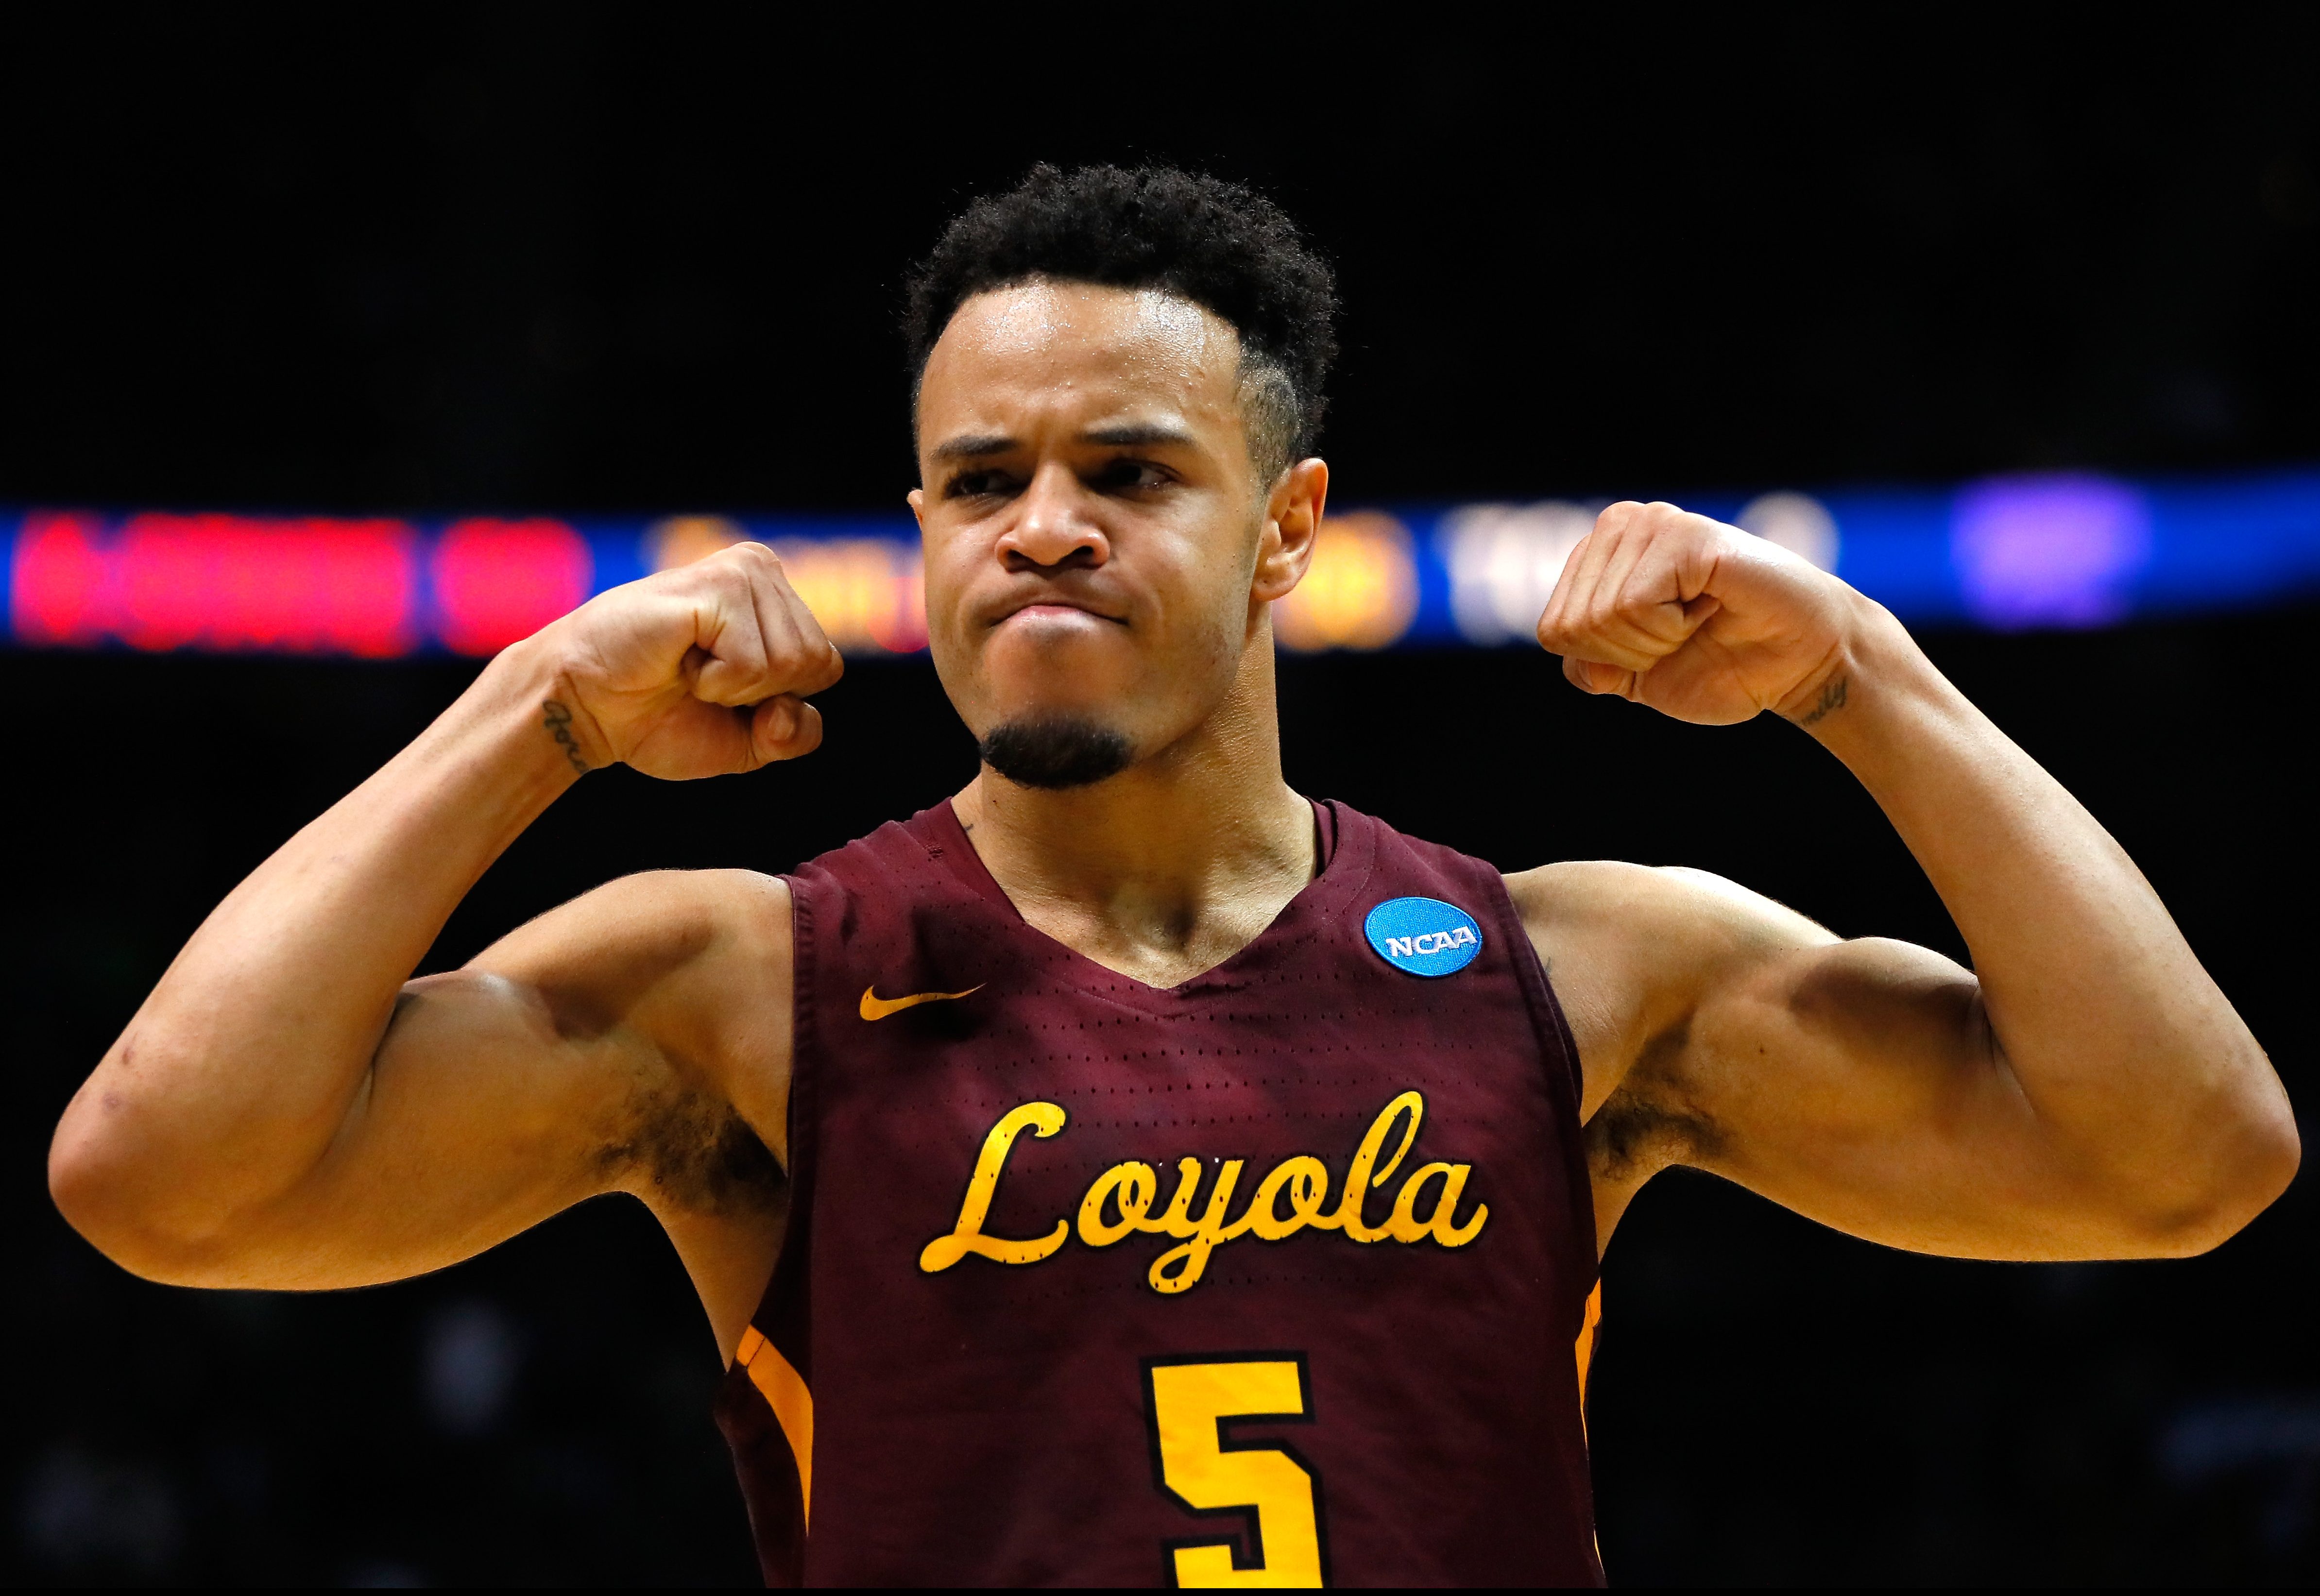 Marques Townes #5 of the Loyola Ramblers reacts after a play late in the second half against the Kansas State Wildcats during the 2018 NCAA Men's Basketball Tournament South Regional at Philips Arena on March 24, 2018 in Atlanta, Georgia.  (Photo by Kevin C. Cox/Getty Images)